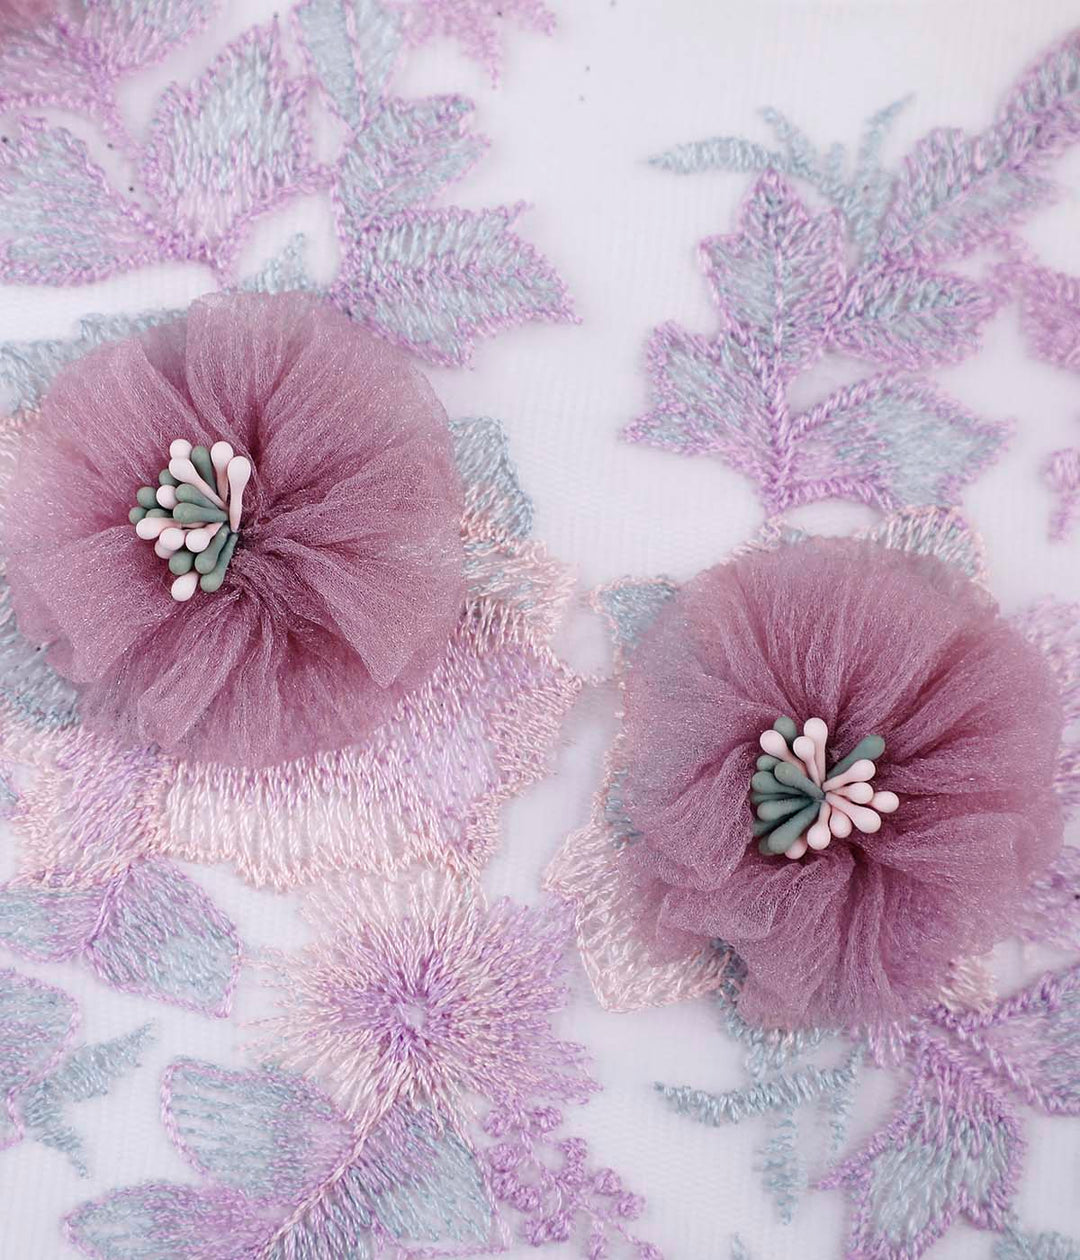 Pastel Purple with Onion Pink Net Flower Embroidery Patch